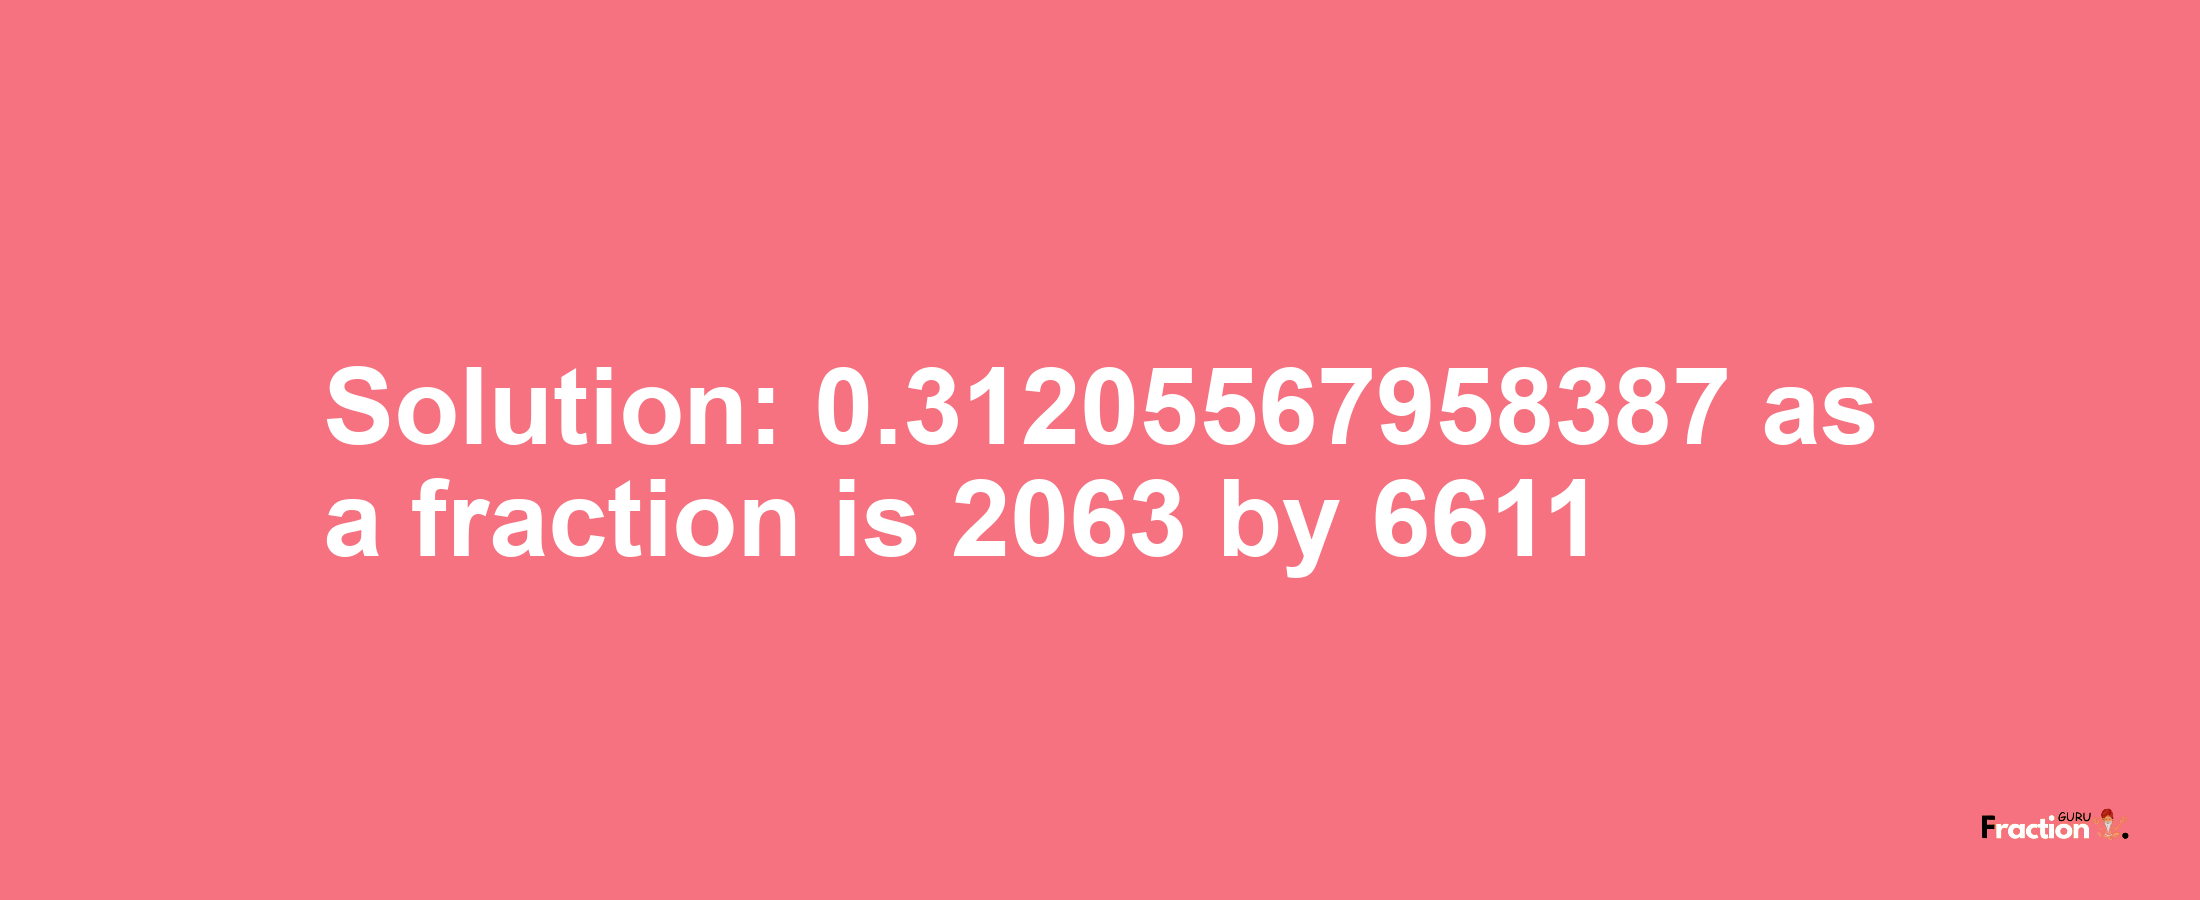 Solution:0.31205567958387 as a fraction is 2063/6611